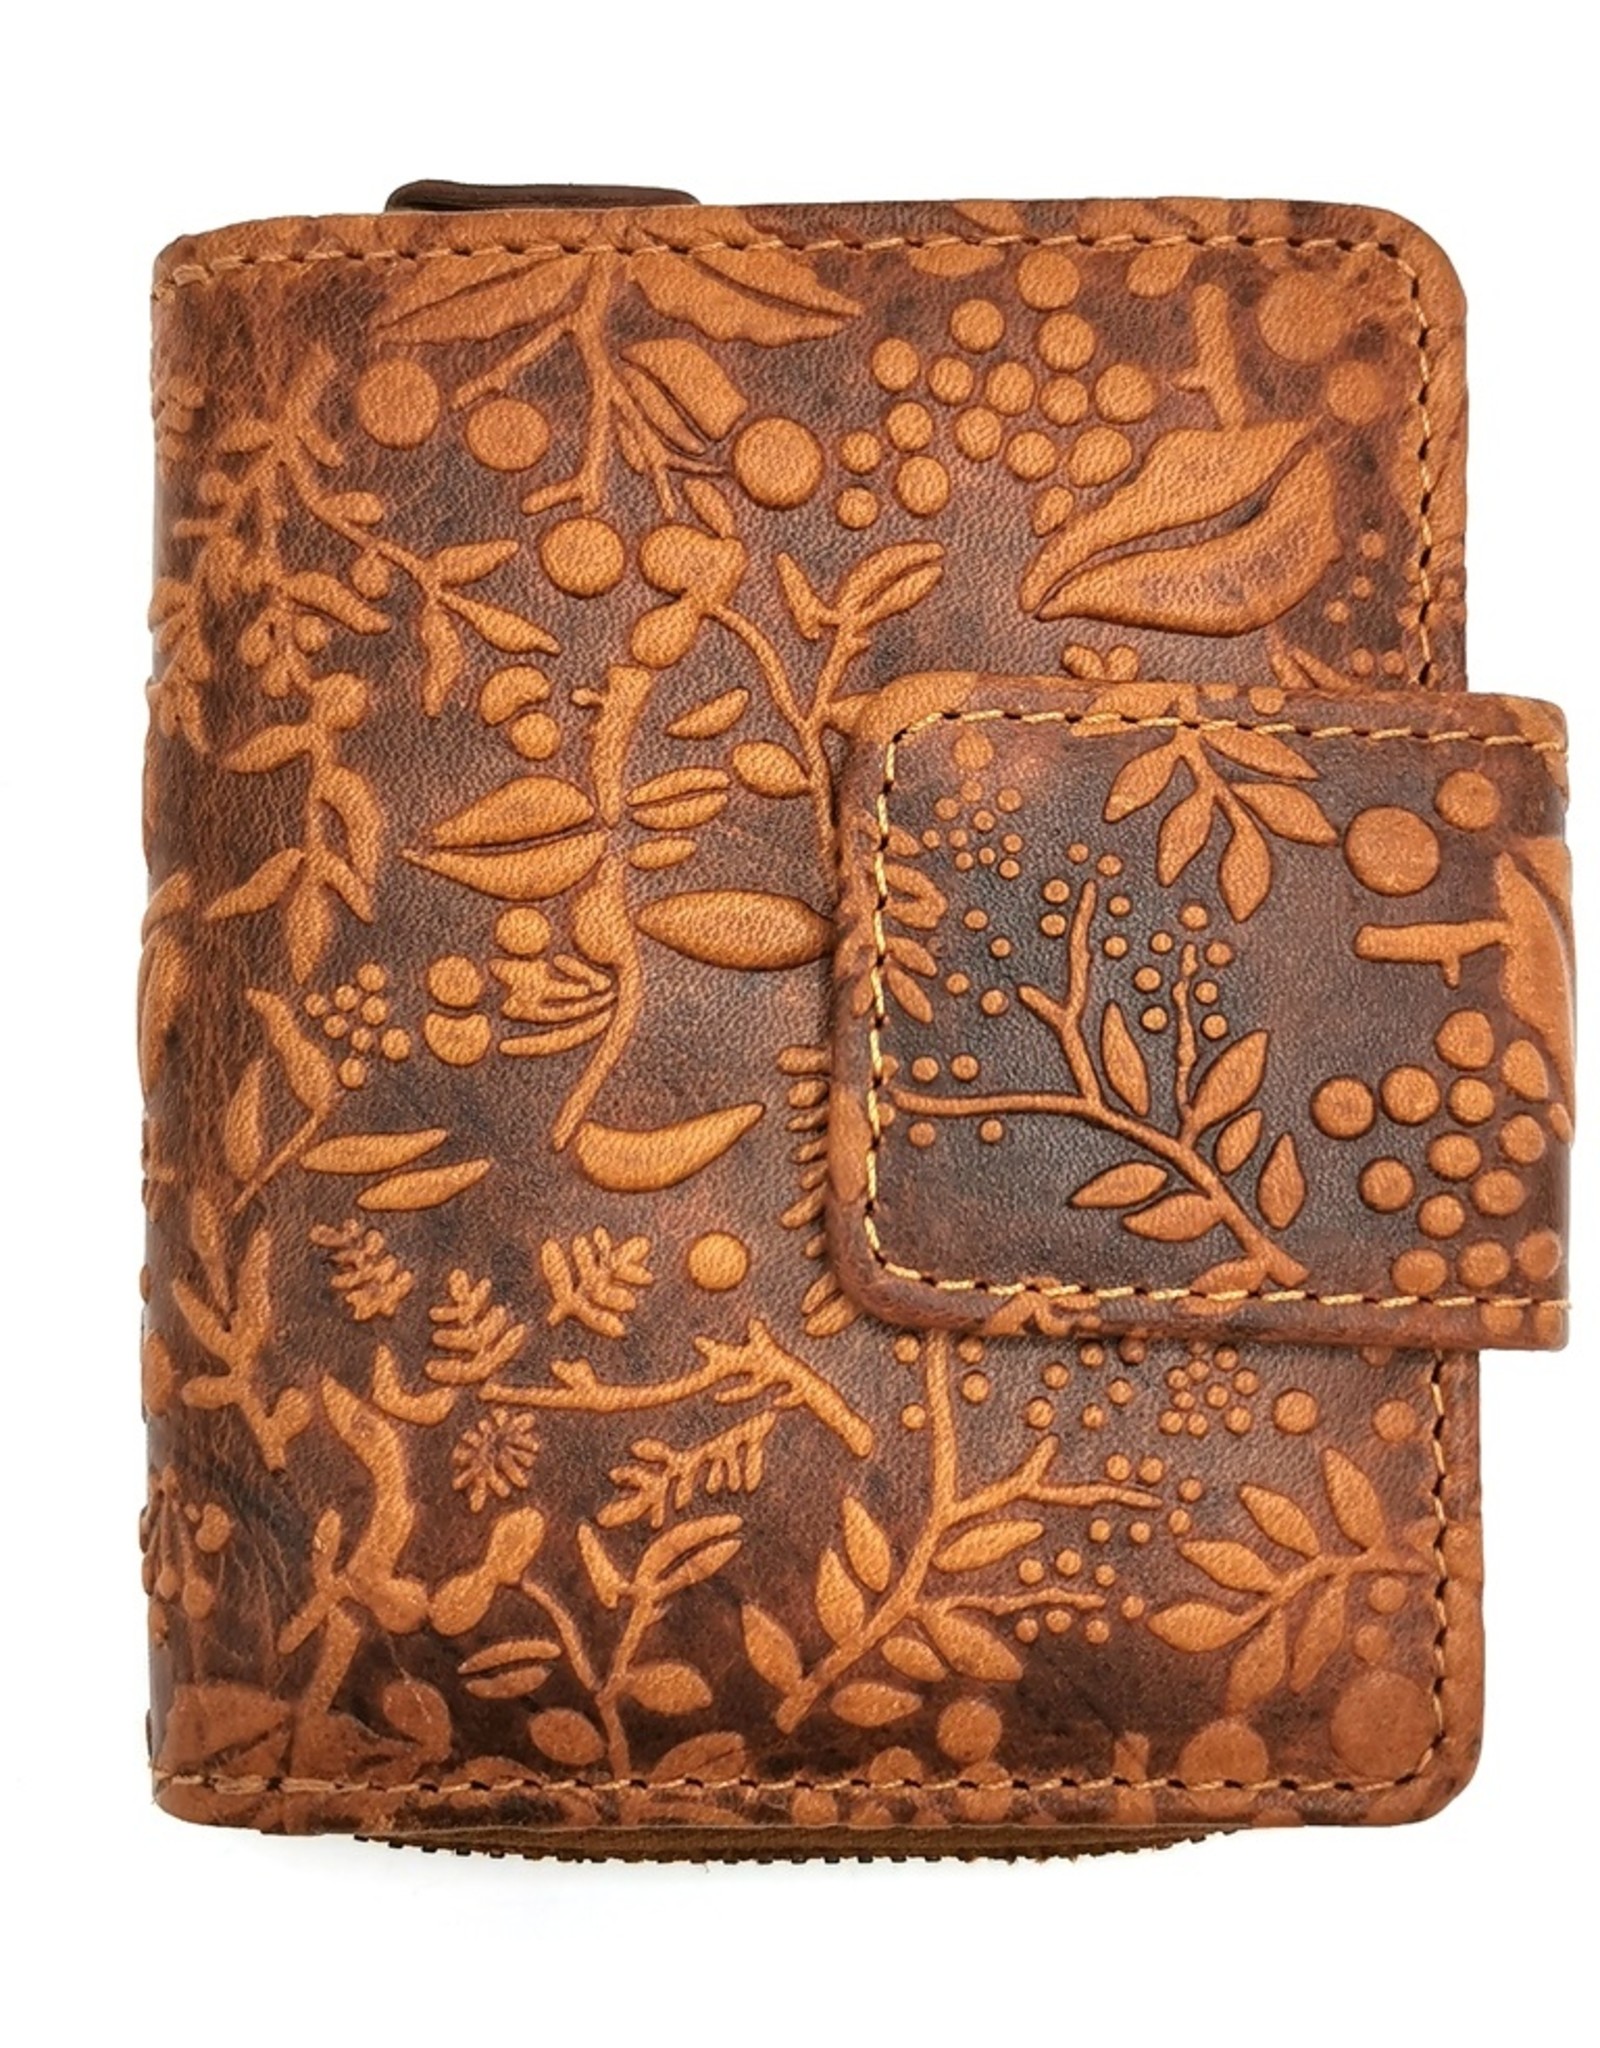 HillBurry Leather Wallets -  HillBurry Leather Wallet with Embossed Flowers Tan